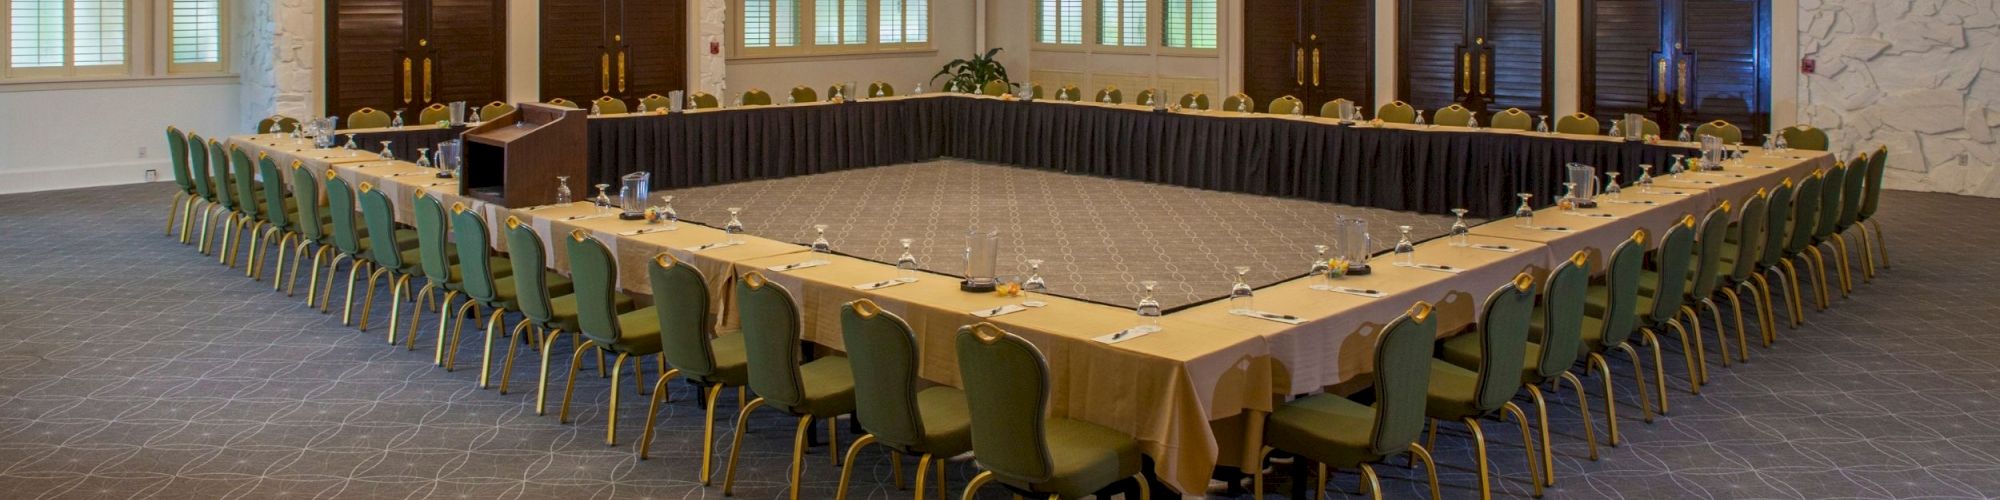 The image shows a large conference room set up with a U-shaped arrangement of tables and green chairs, ready for a meeting or event.